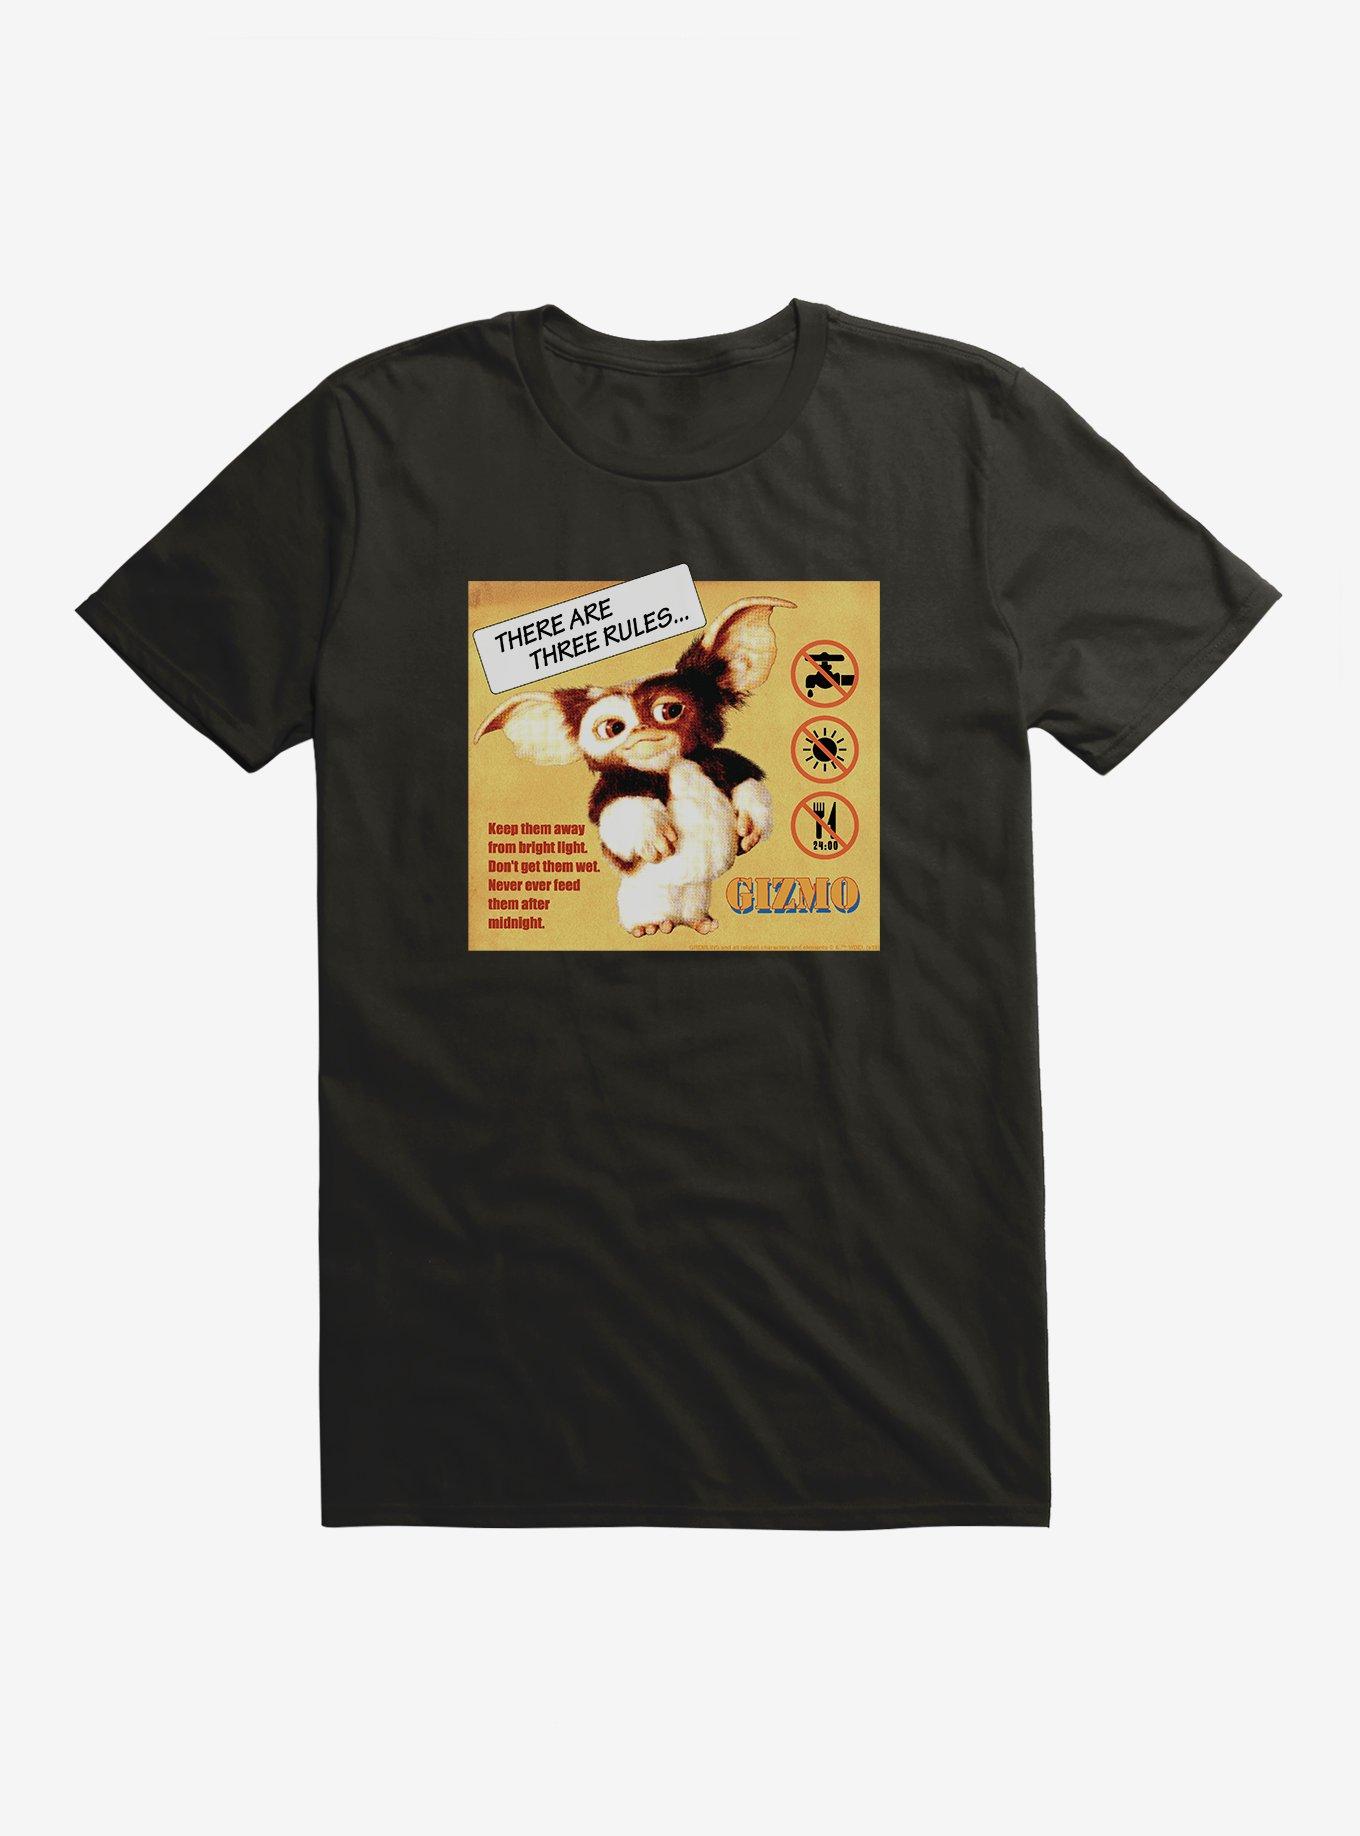 Gremlins Gizmo Rules T-Shirt